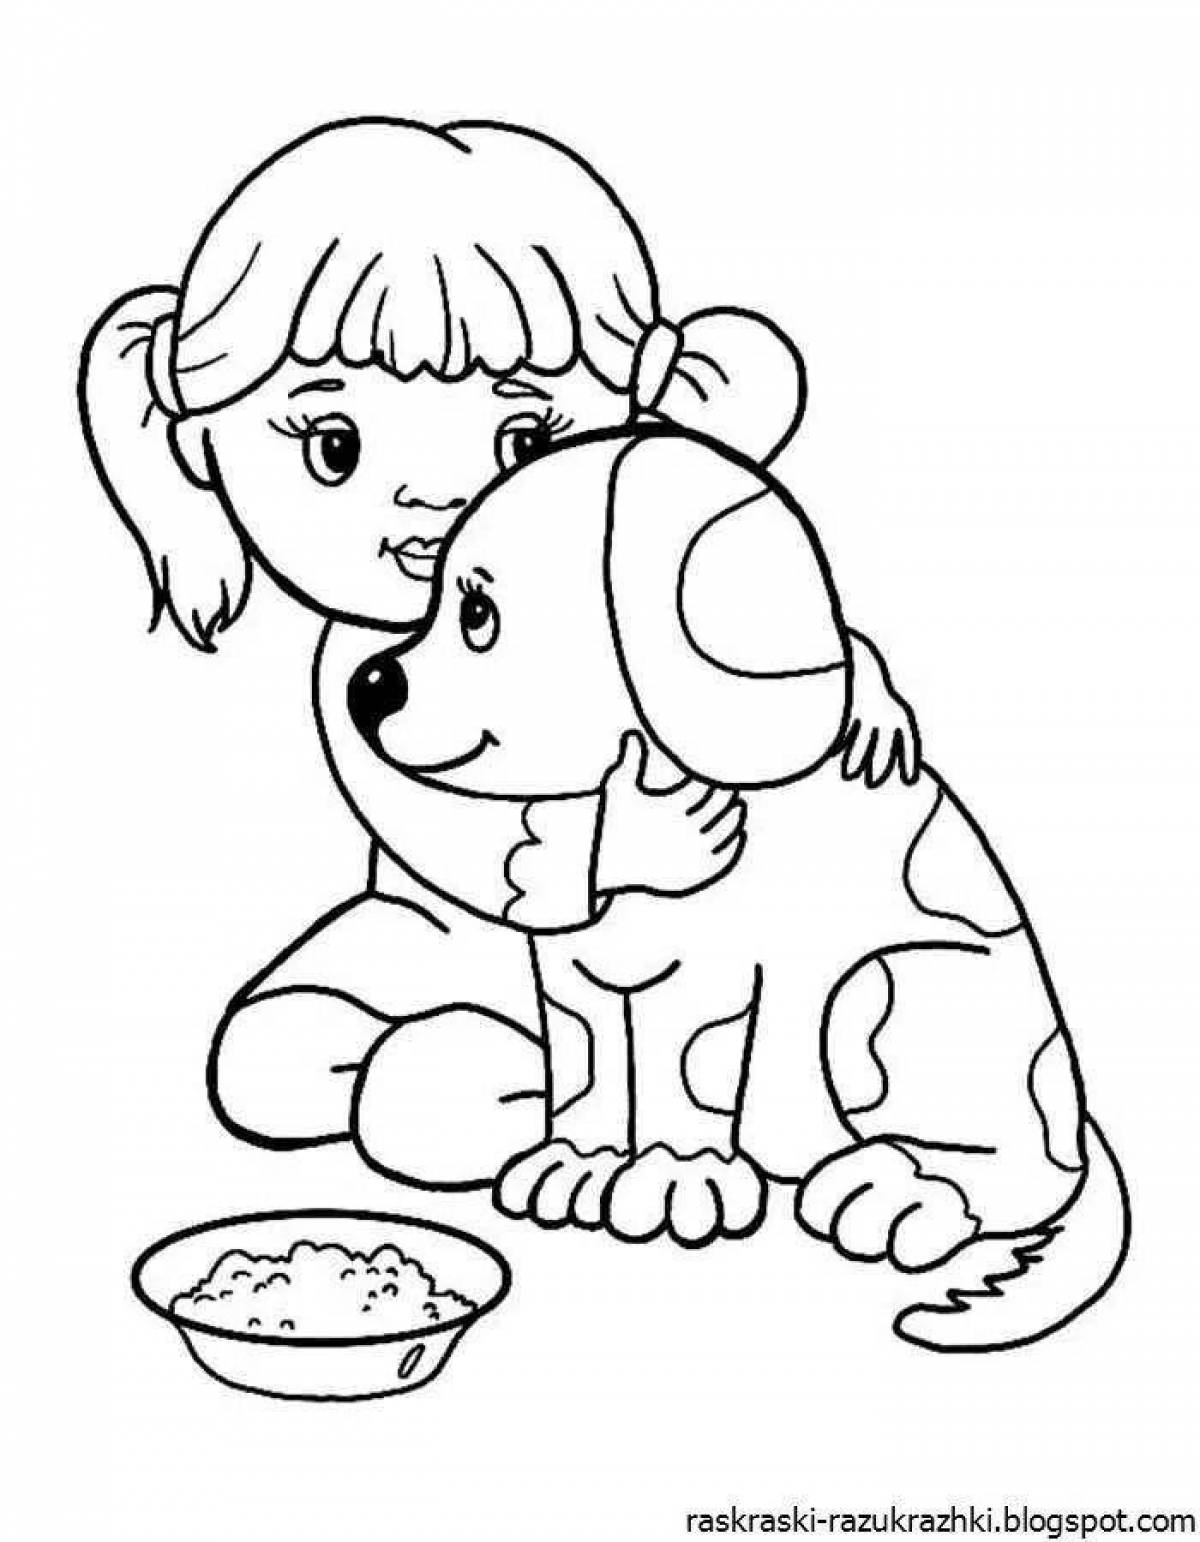 A fascinating coloring book of a girl with a dog